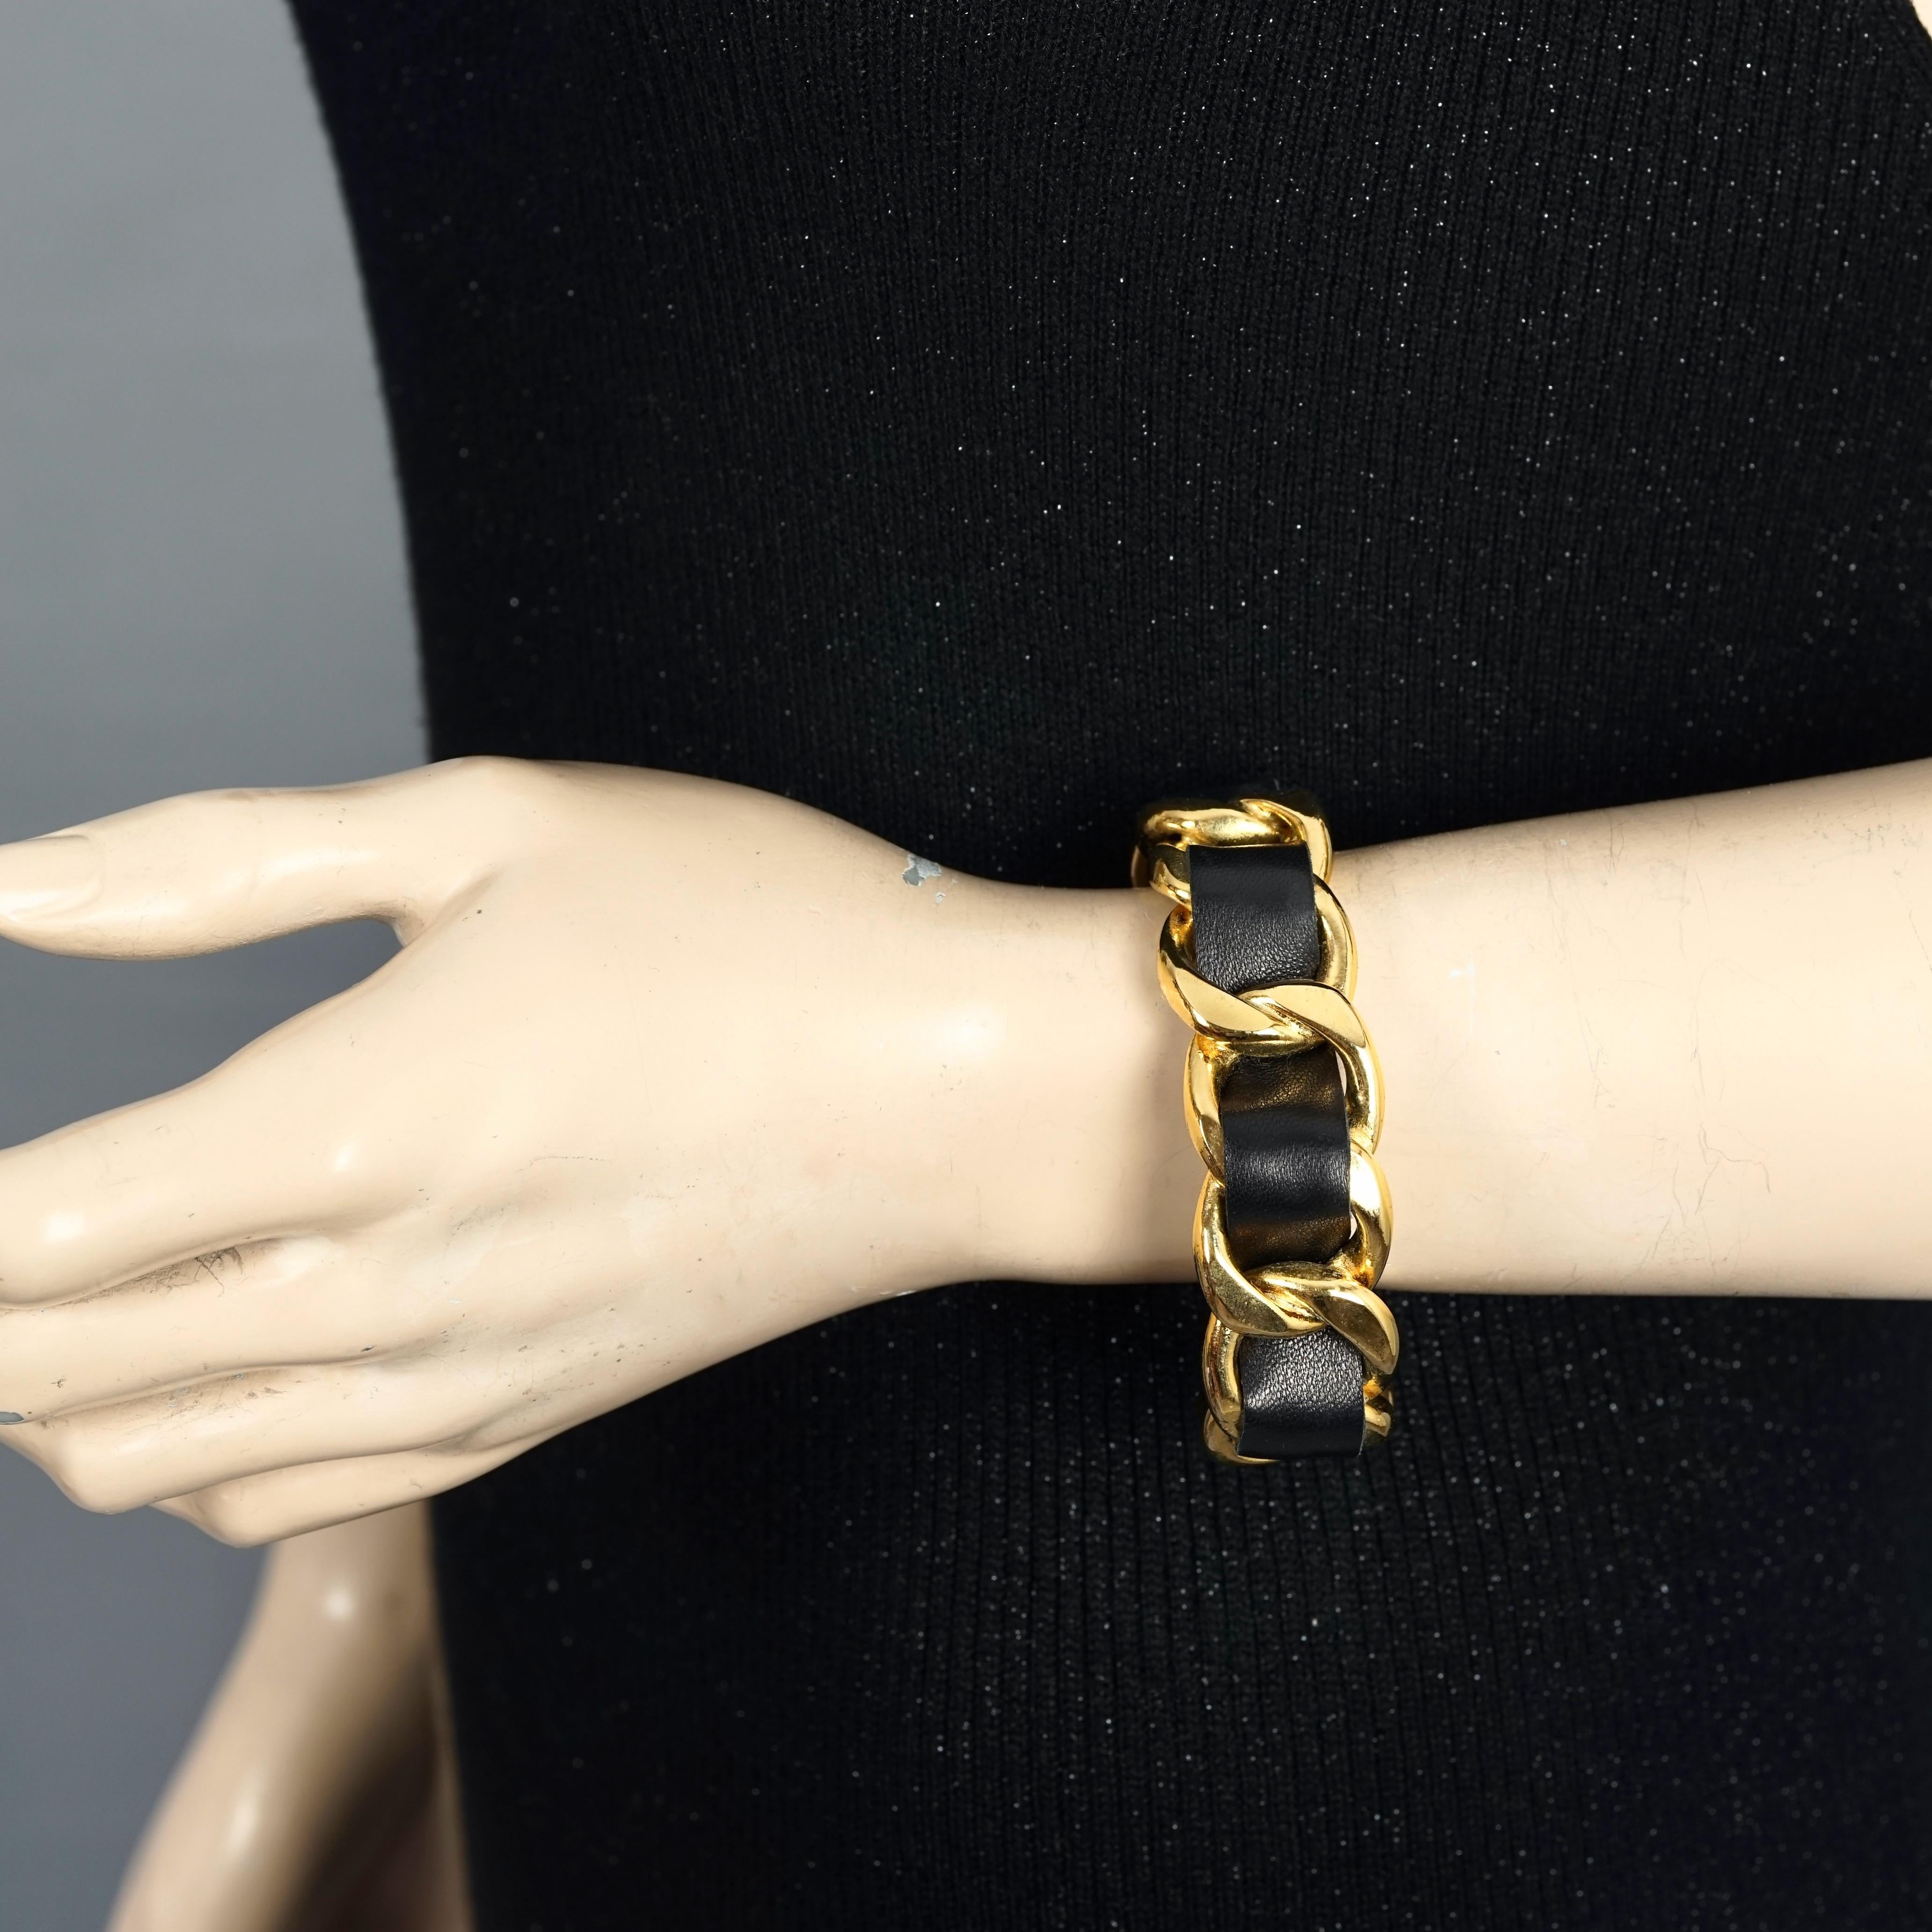 Vintage CHANEL Classic Gold Chain and Leather Cuff Bracelet

Measurements:
Height: 0.90 inch (2.3 cm)
Inside Circumference: 7.20 inches (18.3 cm) opening included

Features:
- 100% Authentic CHANEL.
- Rigid and chunky chain and black leather.
-